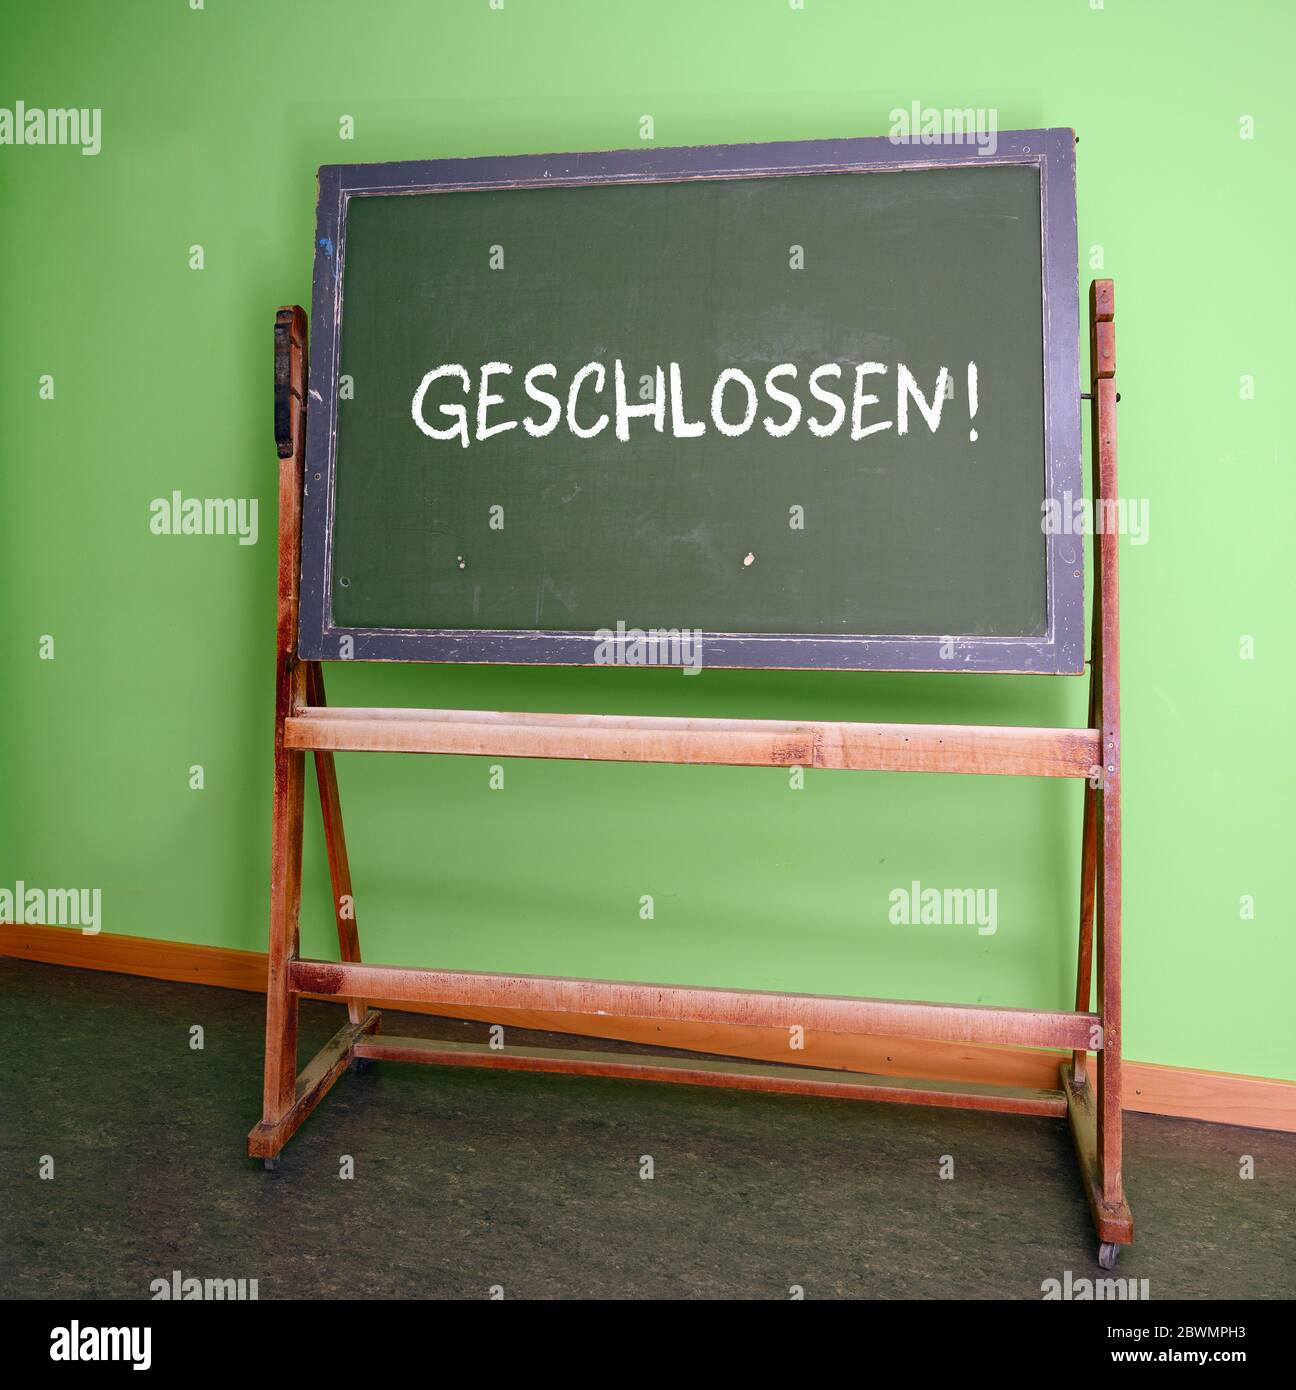 German word Geschlossen, that means Closed, on an old school chalkboard, symbolizes the closure of all schools during the risk of infection with the c Stock Photo